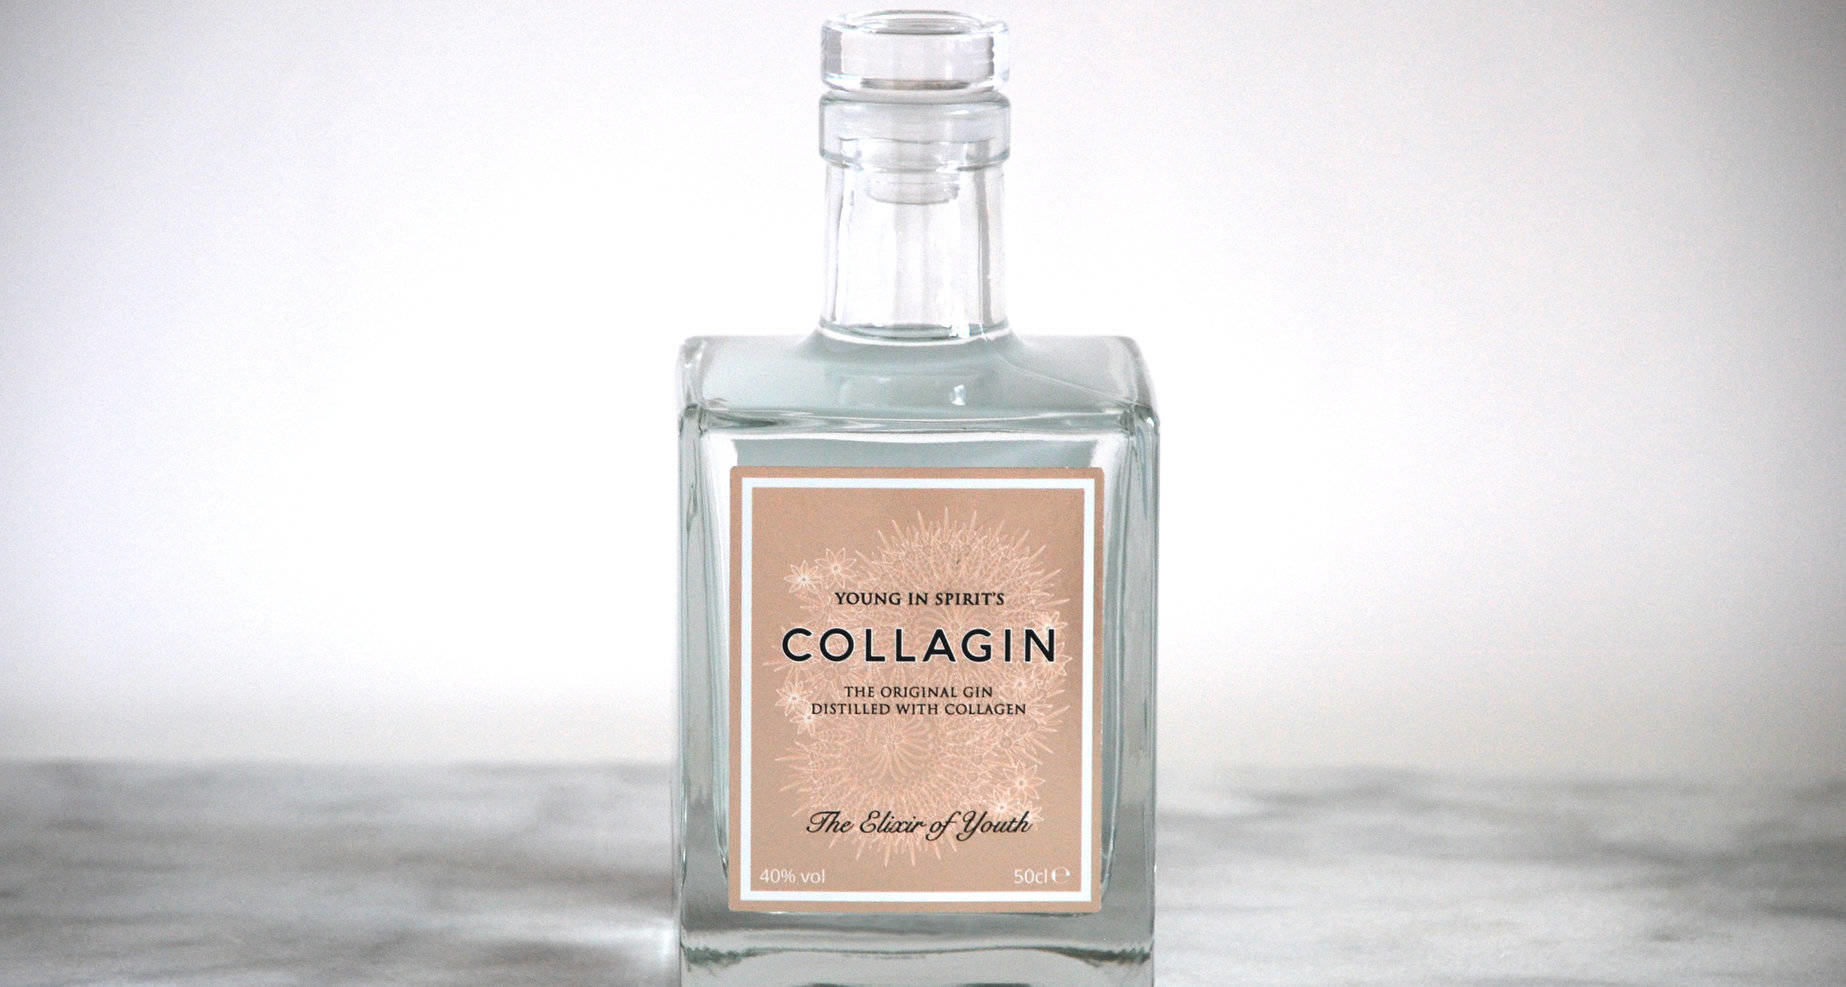 CollaGin is being distributed here by Barry & Fitzwilliam.